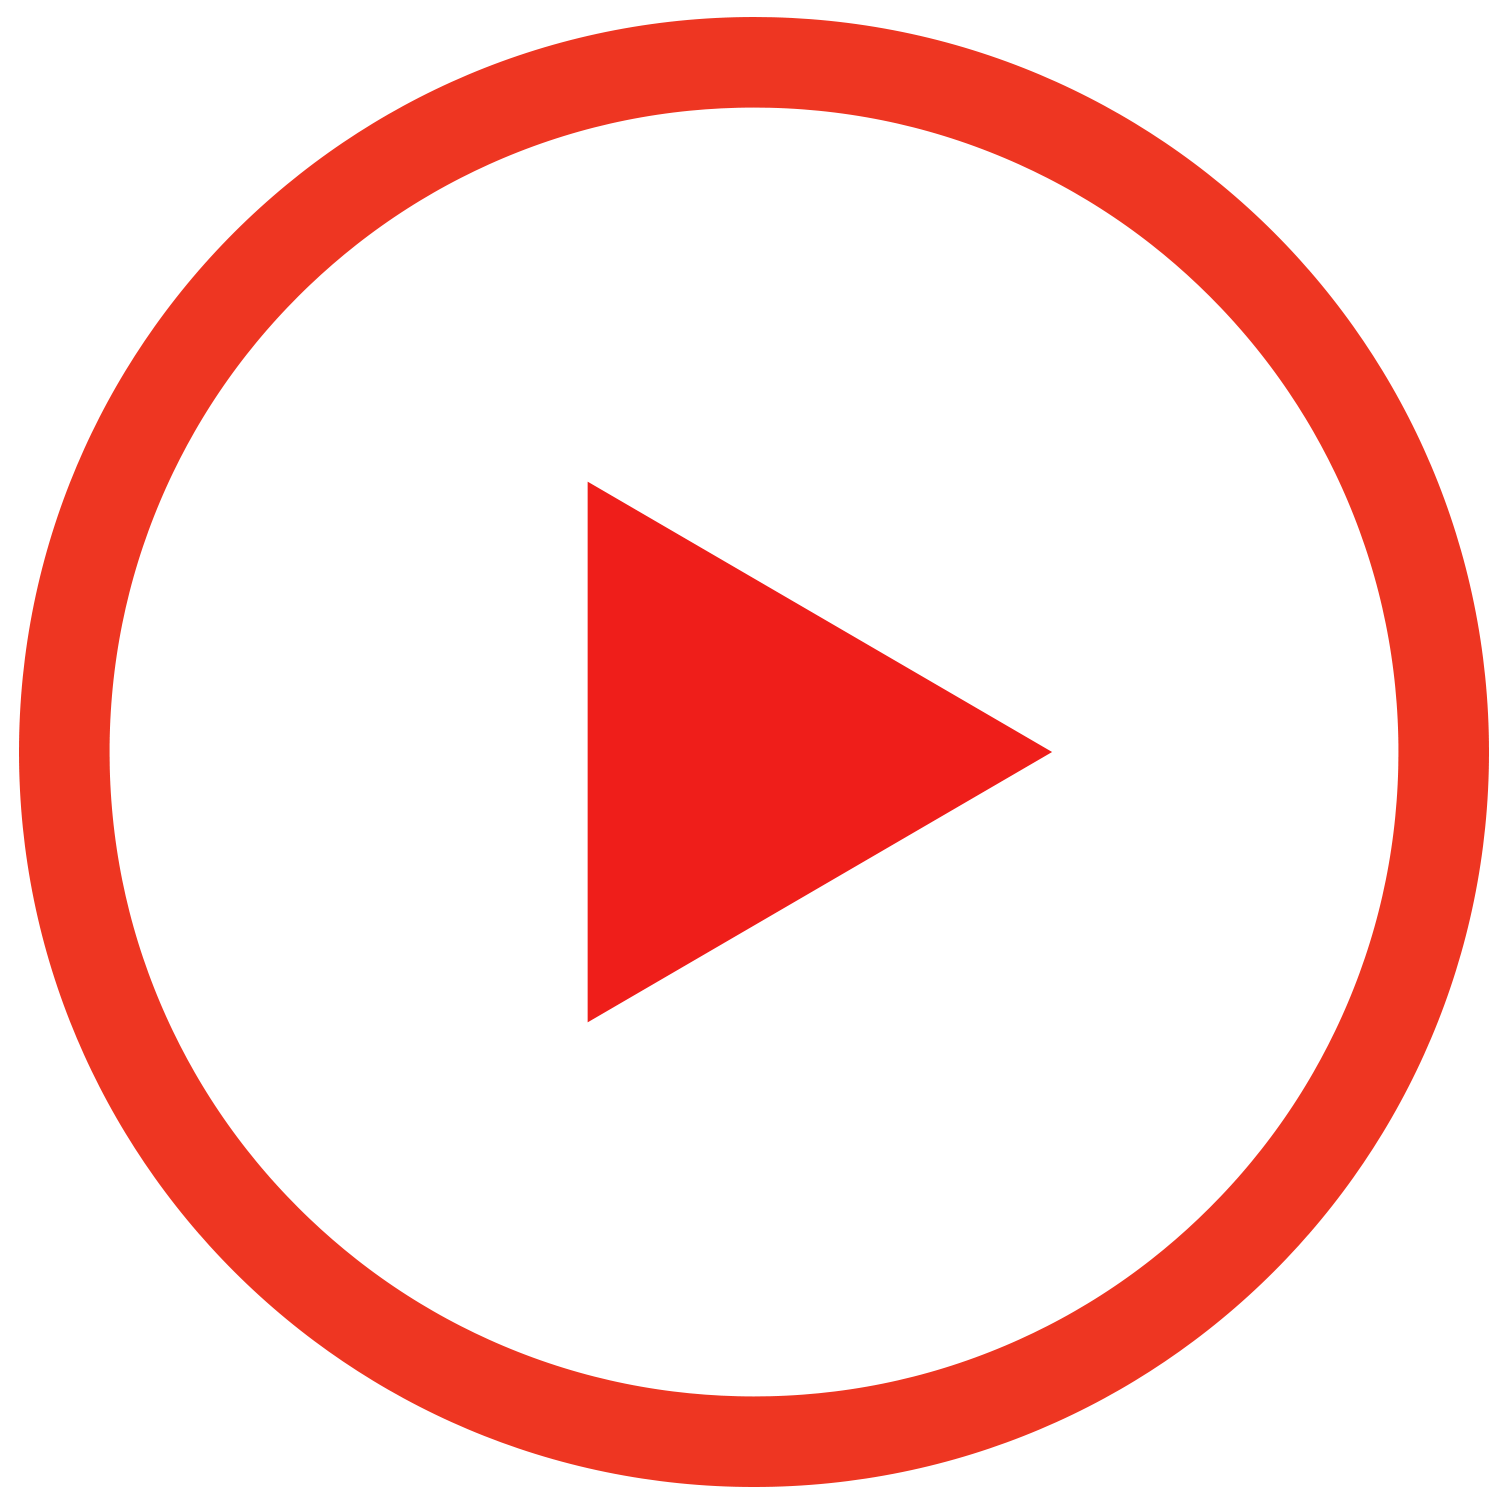 Play Button PNG Free Download